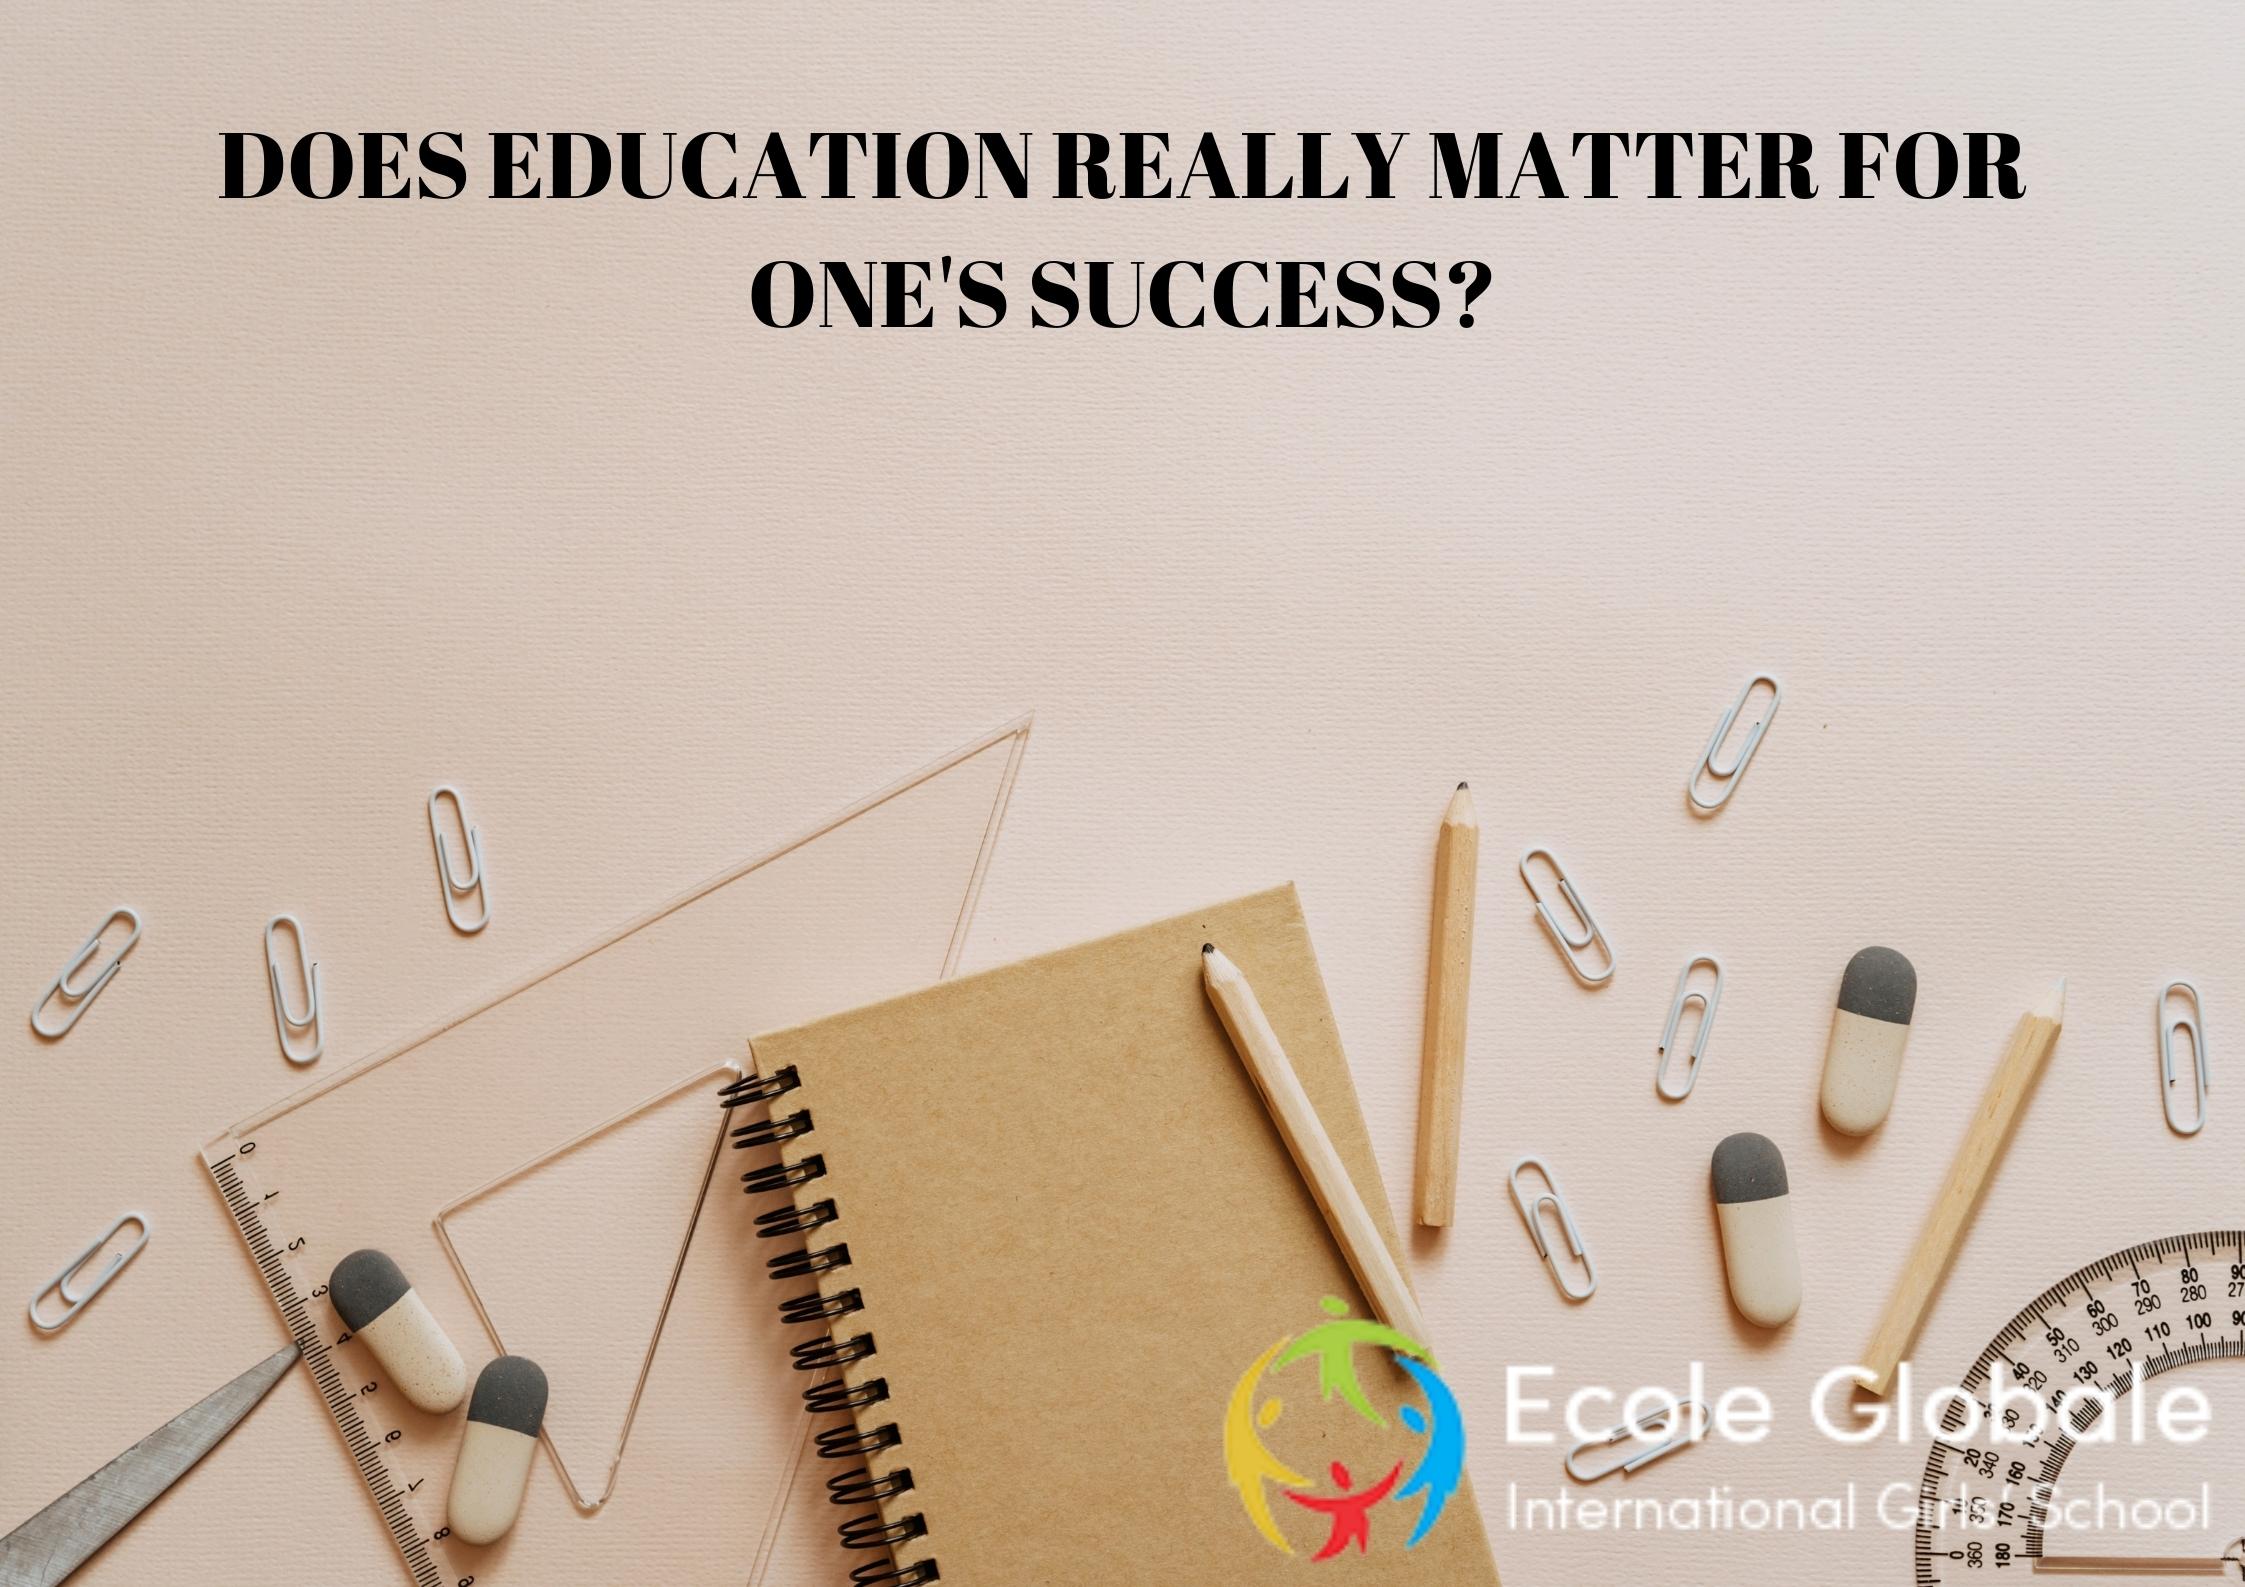 Does education really matter to one’s success?